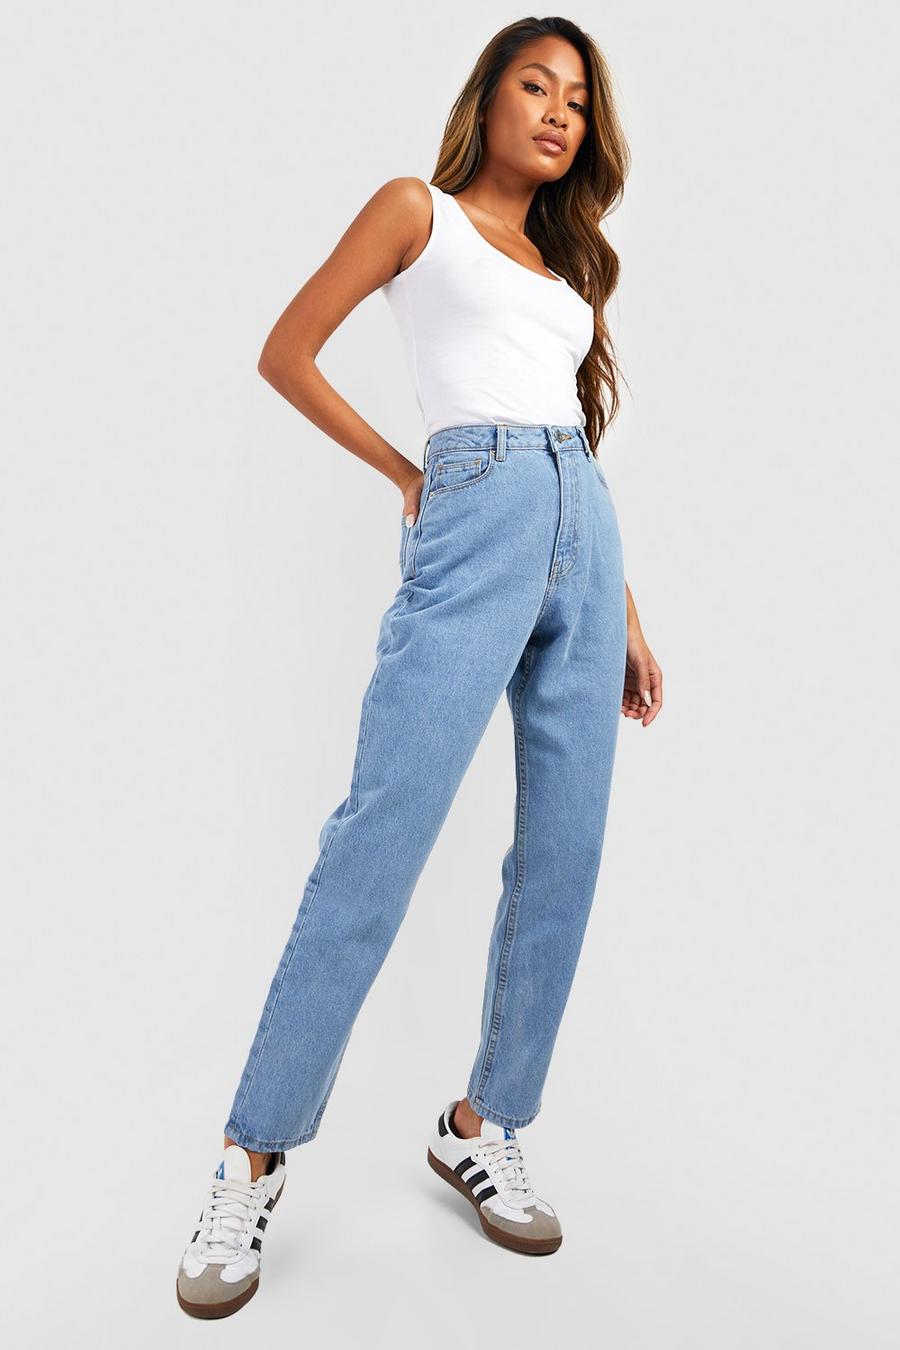 High-Waisted Mom Jean  High waisted mom jeans, Cute casual